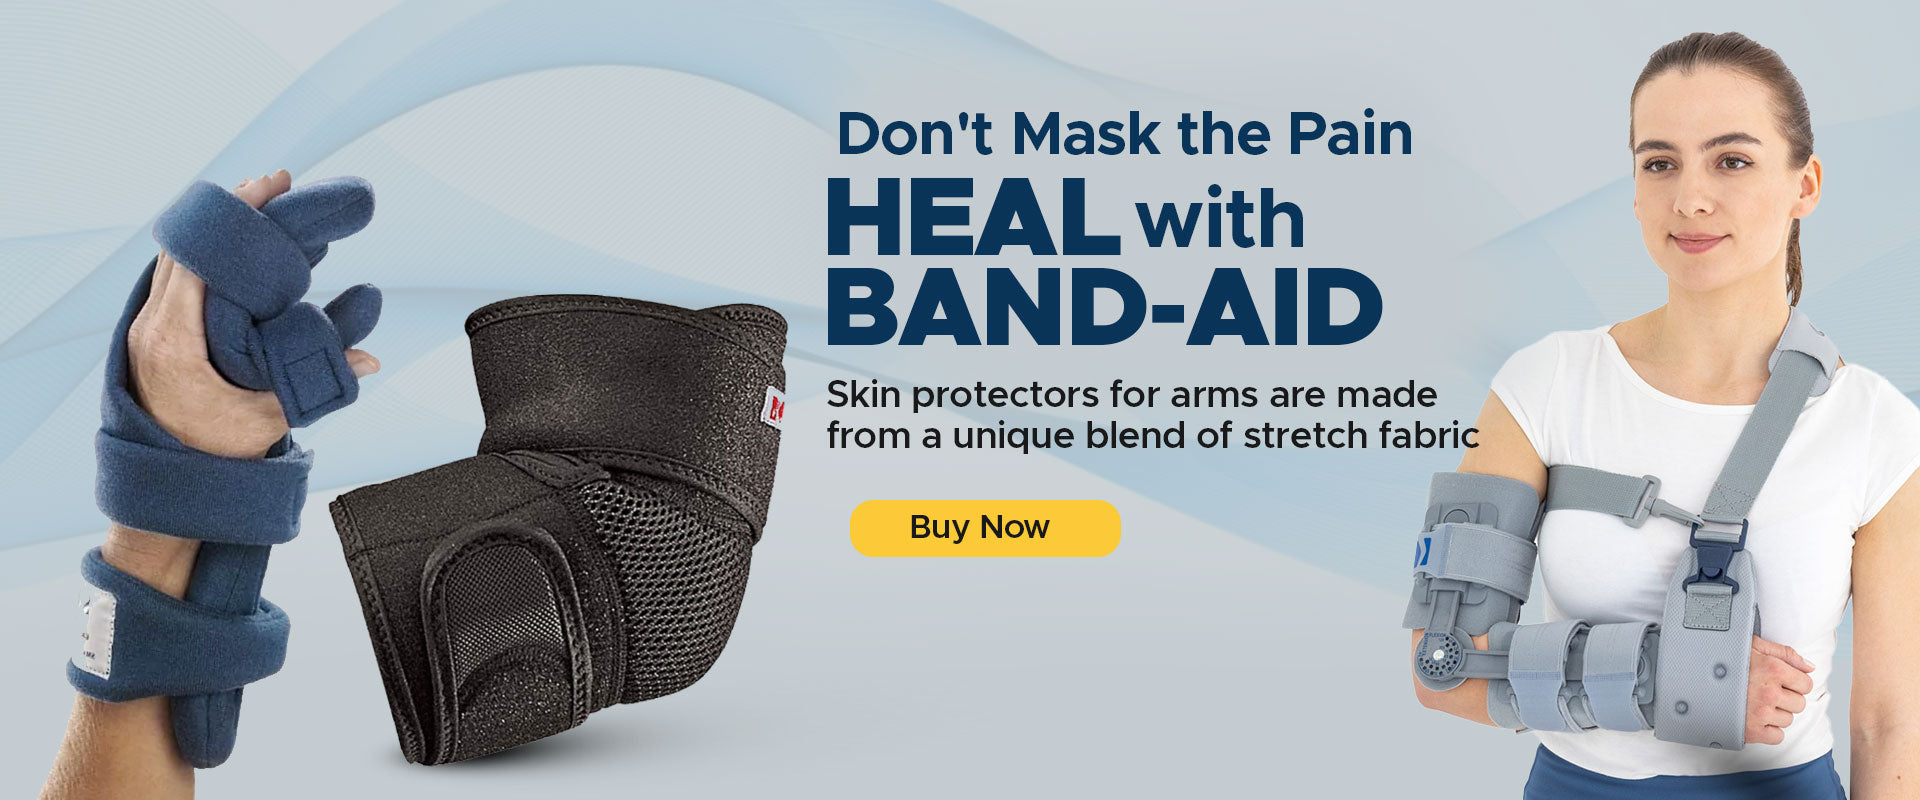 Skin Protectors for Arms